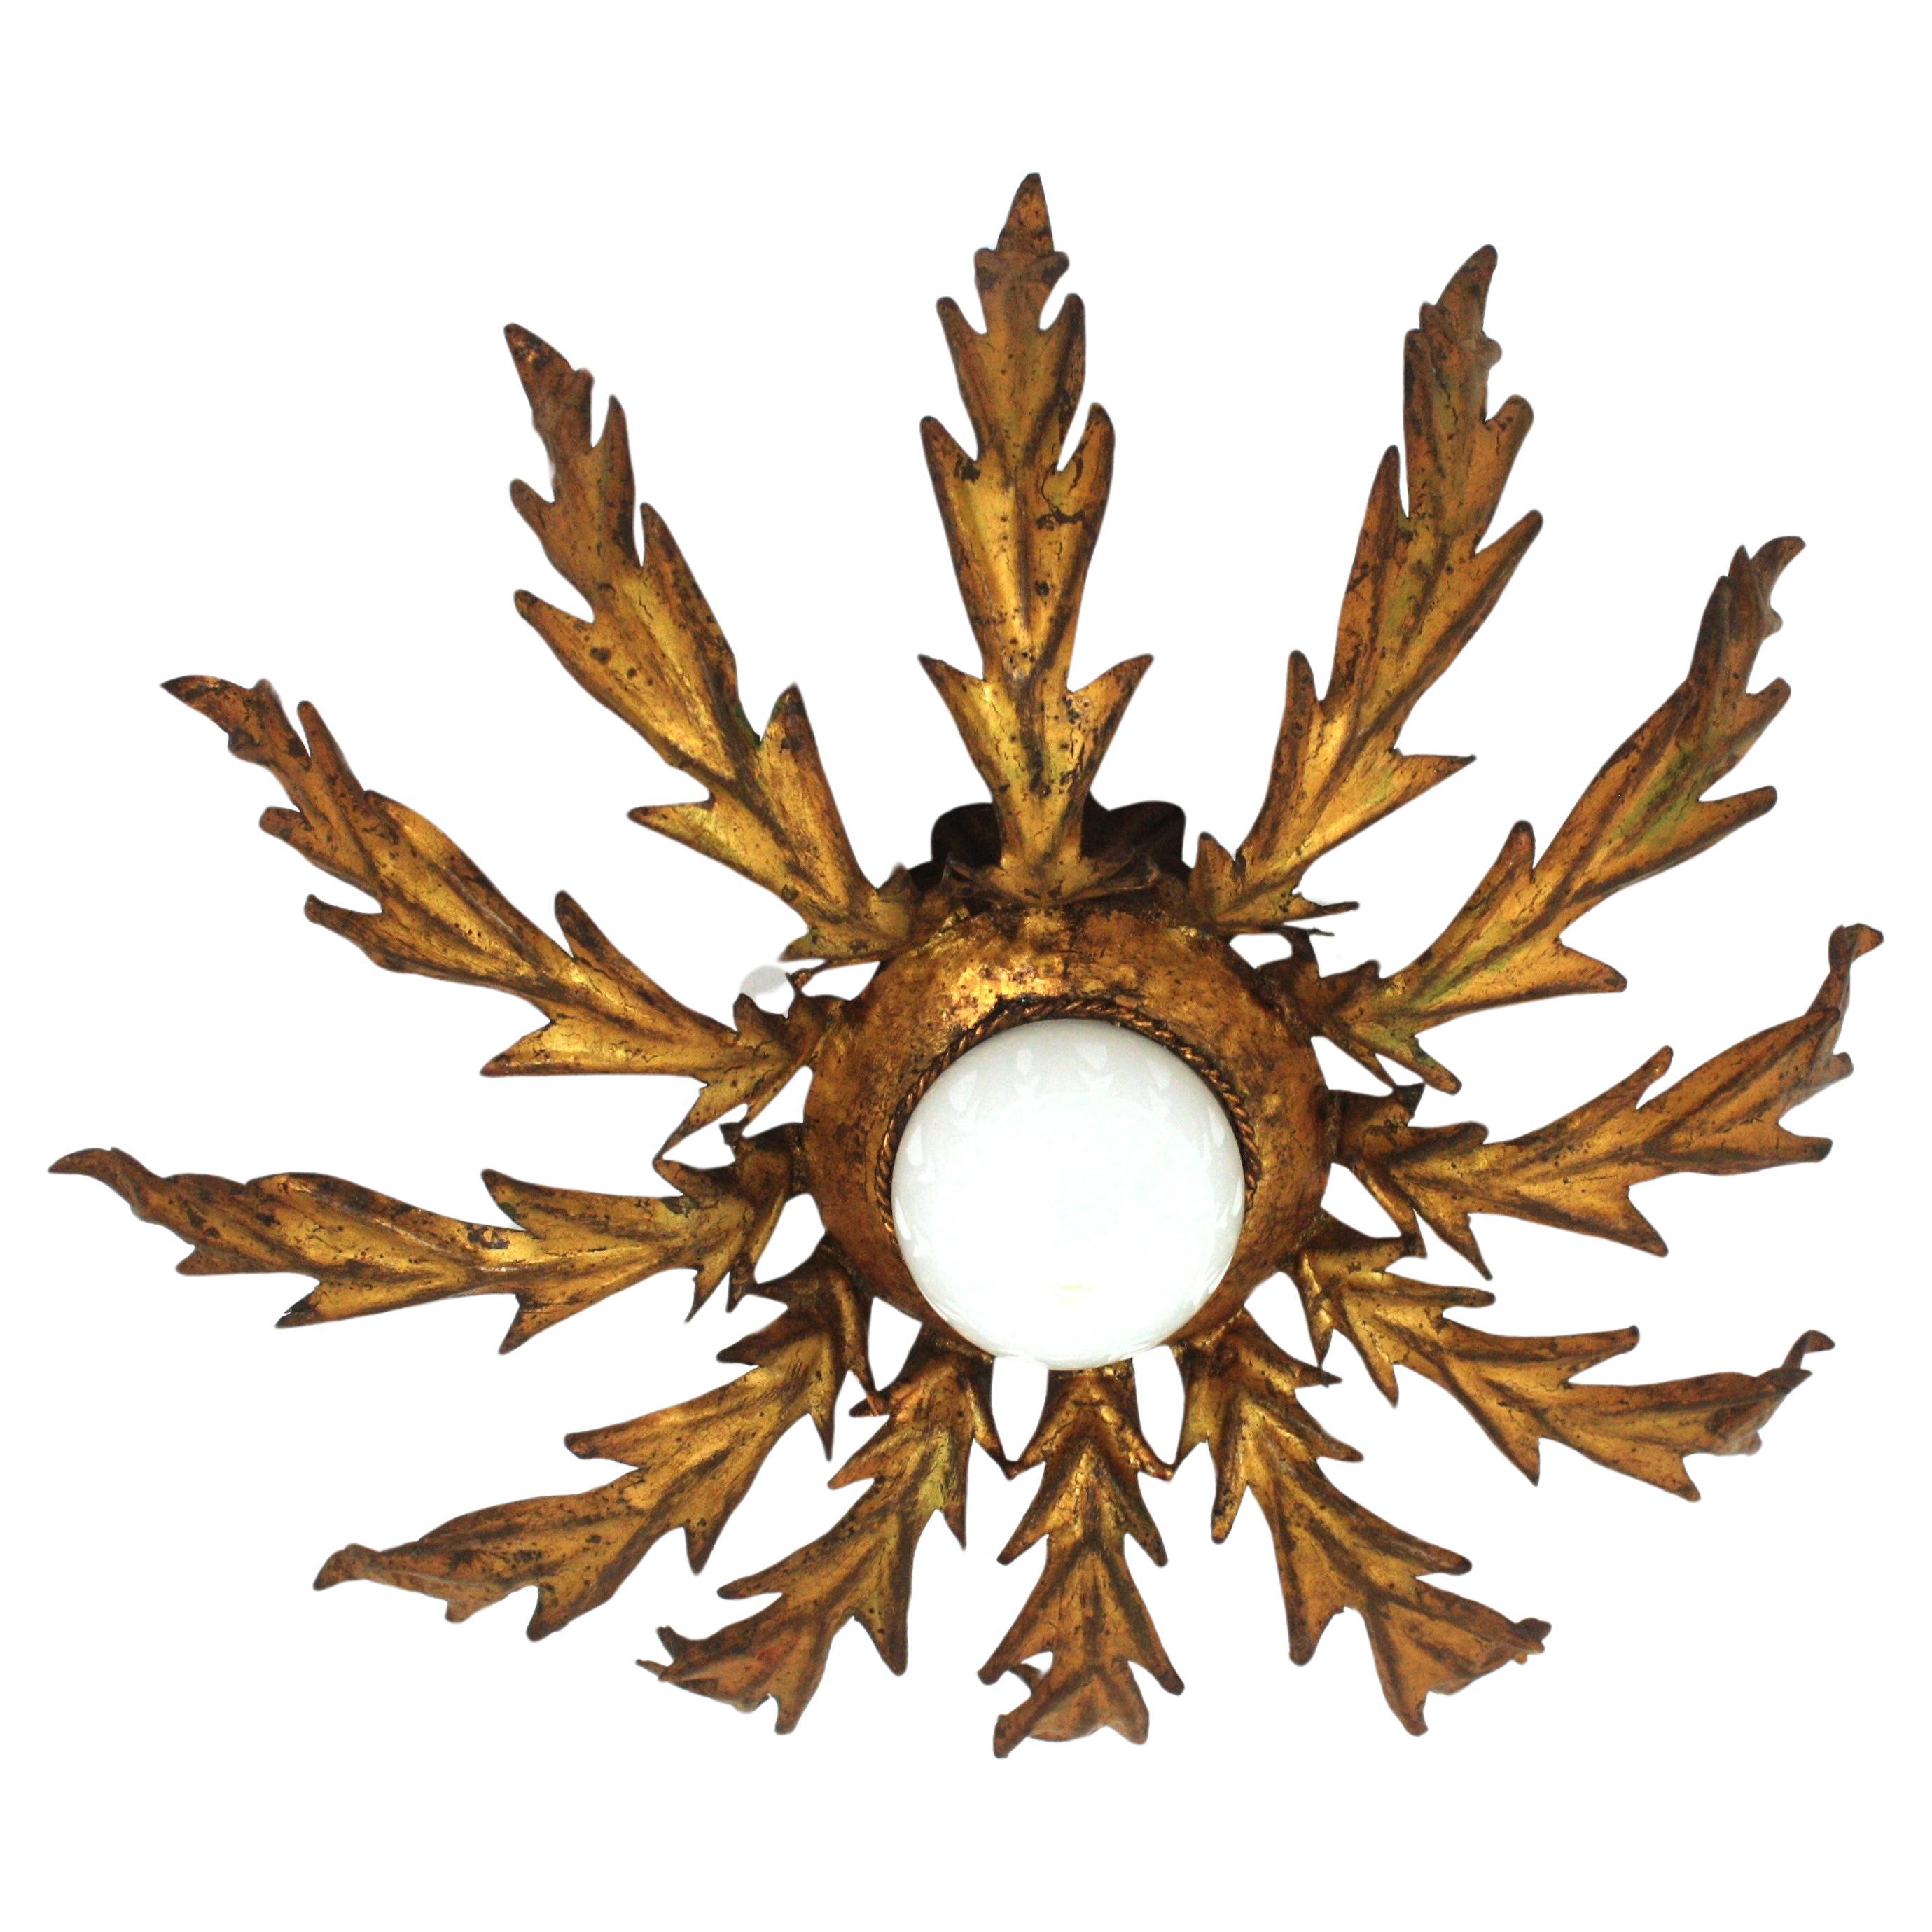 French Sunburst Leafed Ceiling Light Fixture in Gilt Iron, 1940s